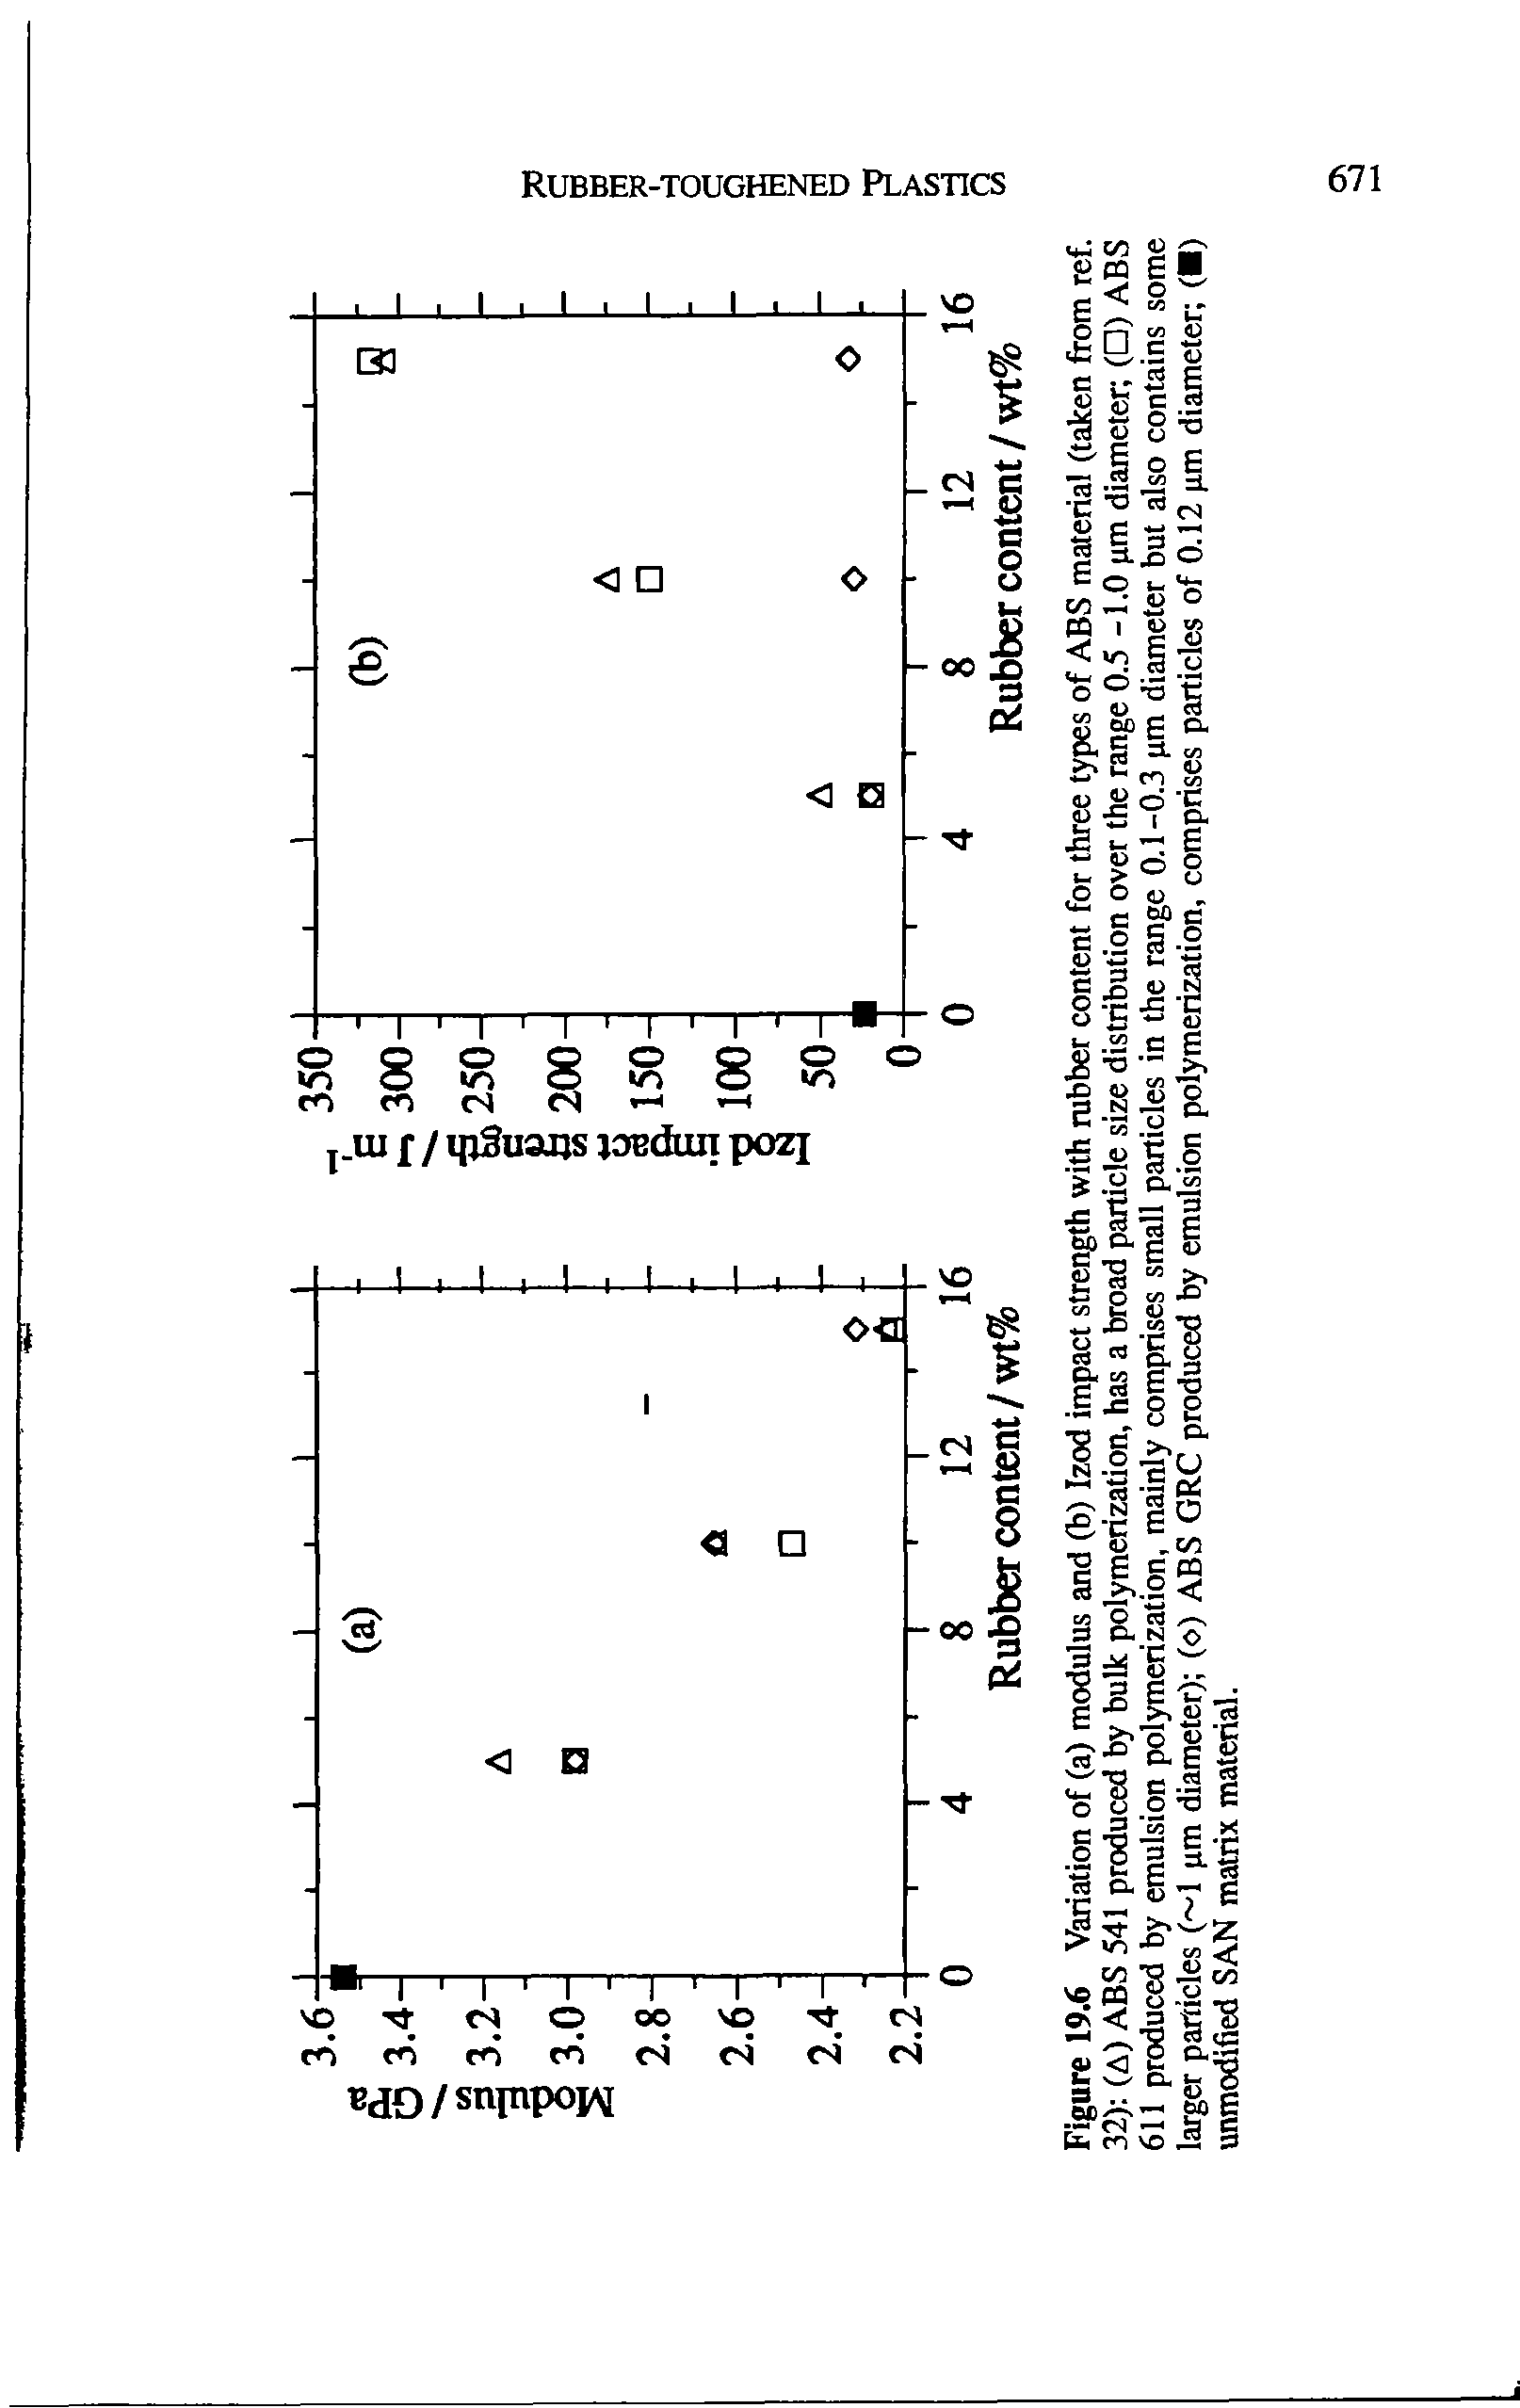 Figure 19.6 Variation of (a) modulus and (b) Izod impact strength with rabber content for three types of ABS materia (taken from ref. 32) (A) ABS 541 produced by bulk polymerization, has a broad particle size distribution over the range 0.5 -1.0 pm diameter, ( ) ABS 611 produced by emulsion polymerization, mainly comprises small particles in the range 0.1-0.3 pm diameter but also contains some larger particles ( 1 pm diameter) (o) ABS GRC produced by emulsion polymerization, comprises particles of 0.12 pm diameter ( ) unmodified SAN matrix material.